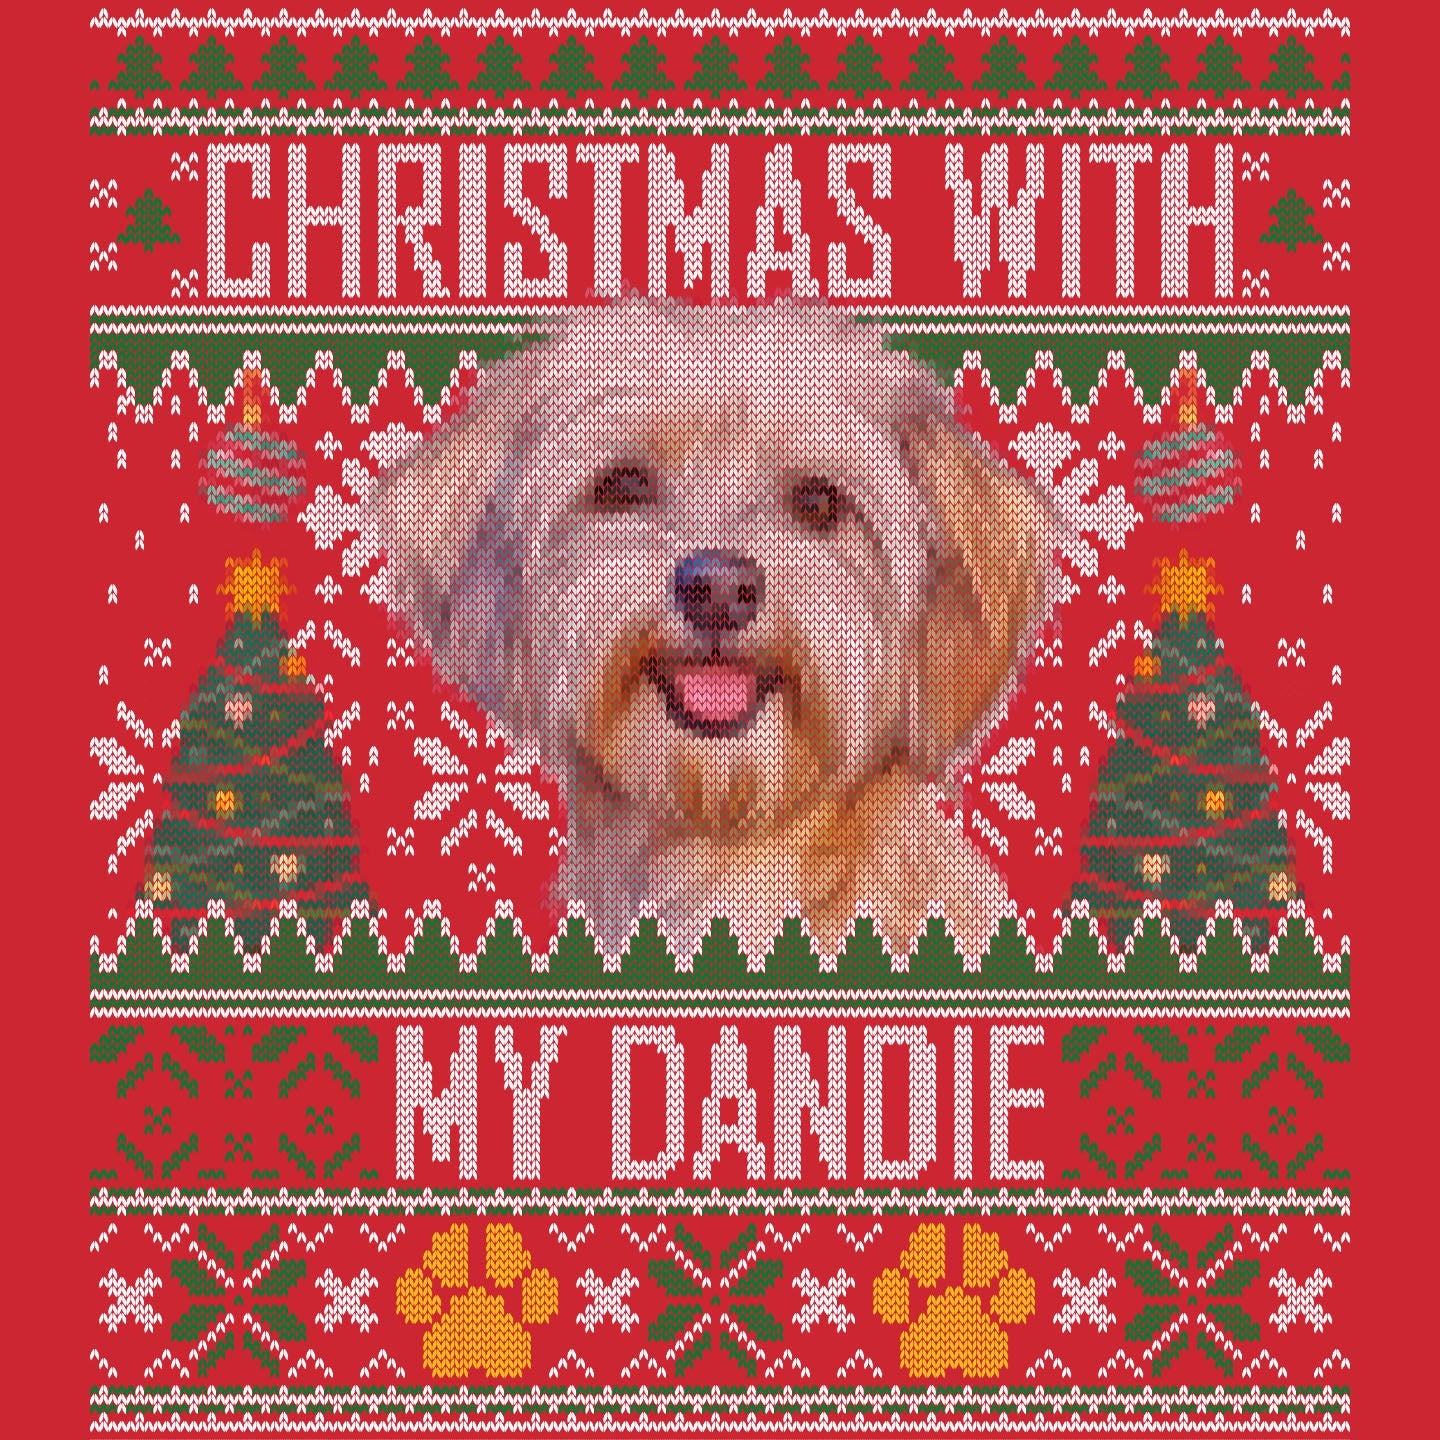 Ugly Sweater Christmas with My Dandie Dinmont Terrier - Adult Unisex Long Sleeve T-Shirt